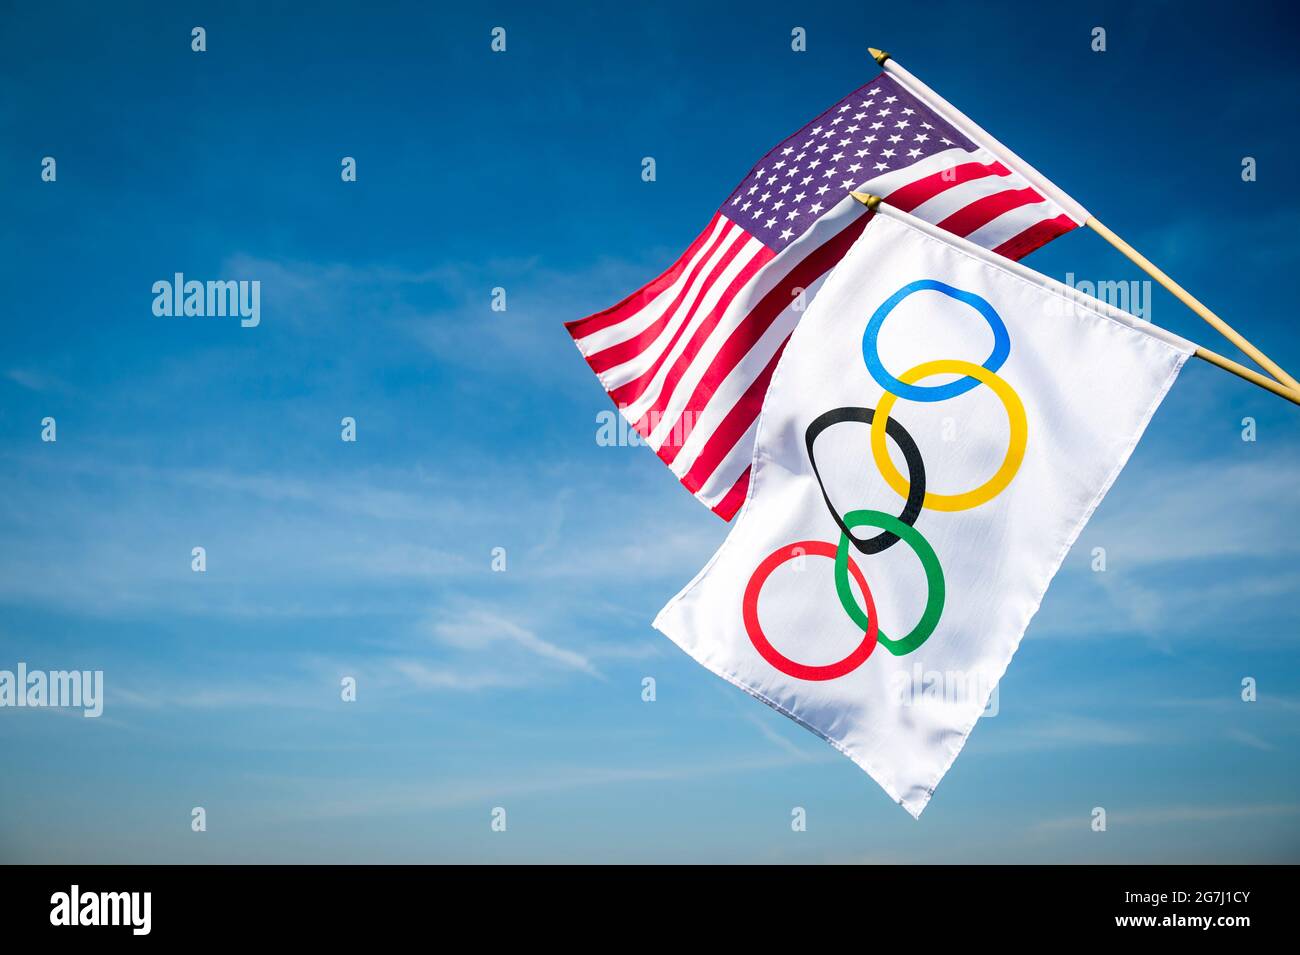 RIO DE JANEIRO - MARCH, 2016: An Olympic flag hangs together with a US stars and stripes flag under bright blue sky. Stock Photo